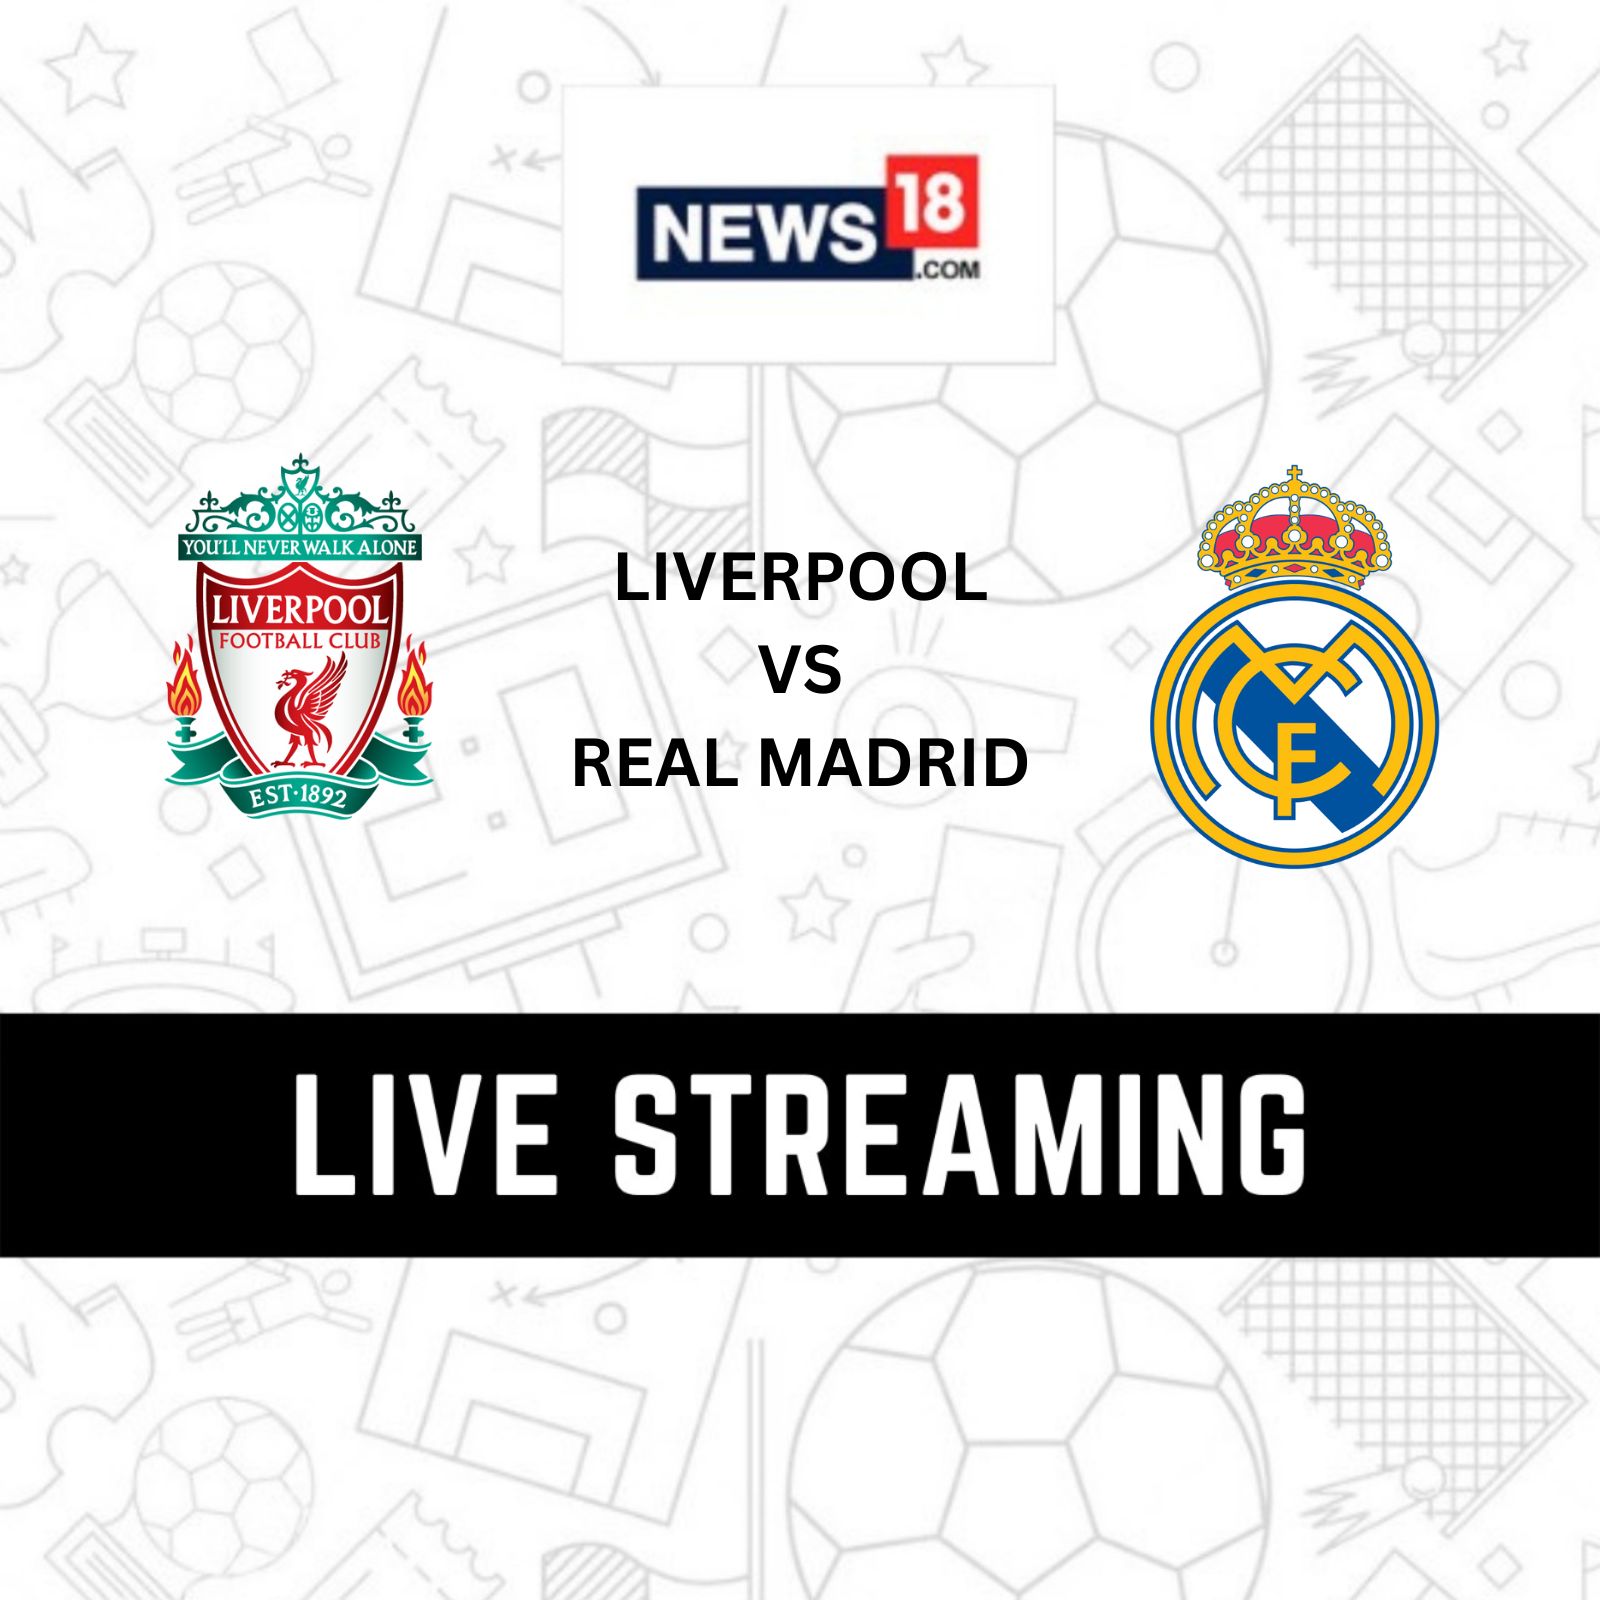 Liverpool vs Real Madrid UEFA Champions League Live Streaming When and Where to Watch Liverpool vs Real Madrid Match Live?